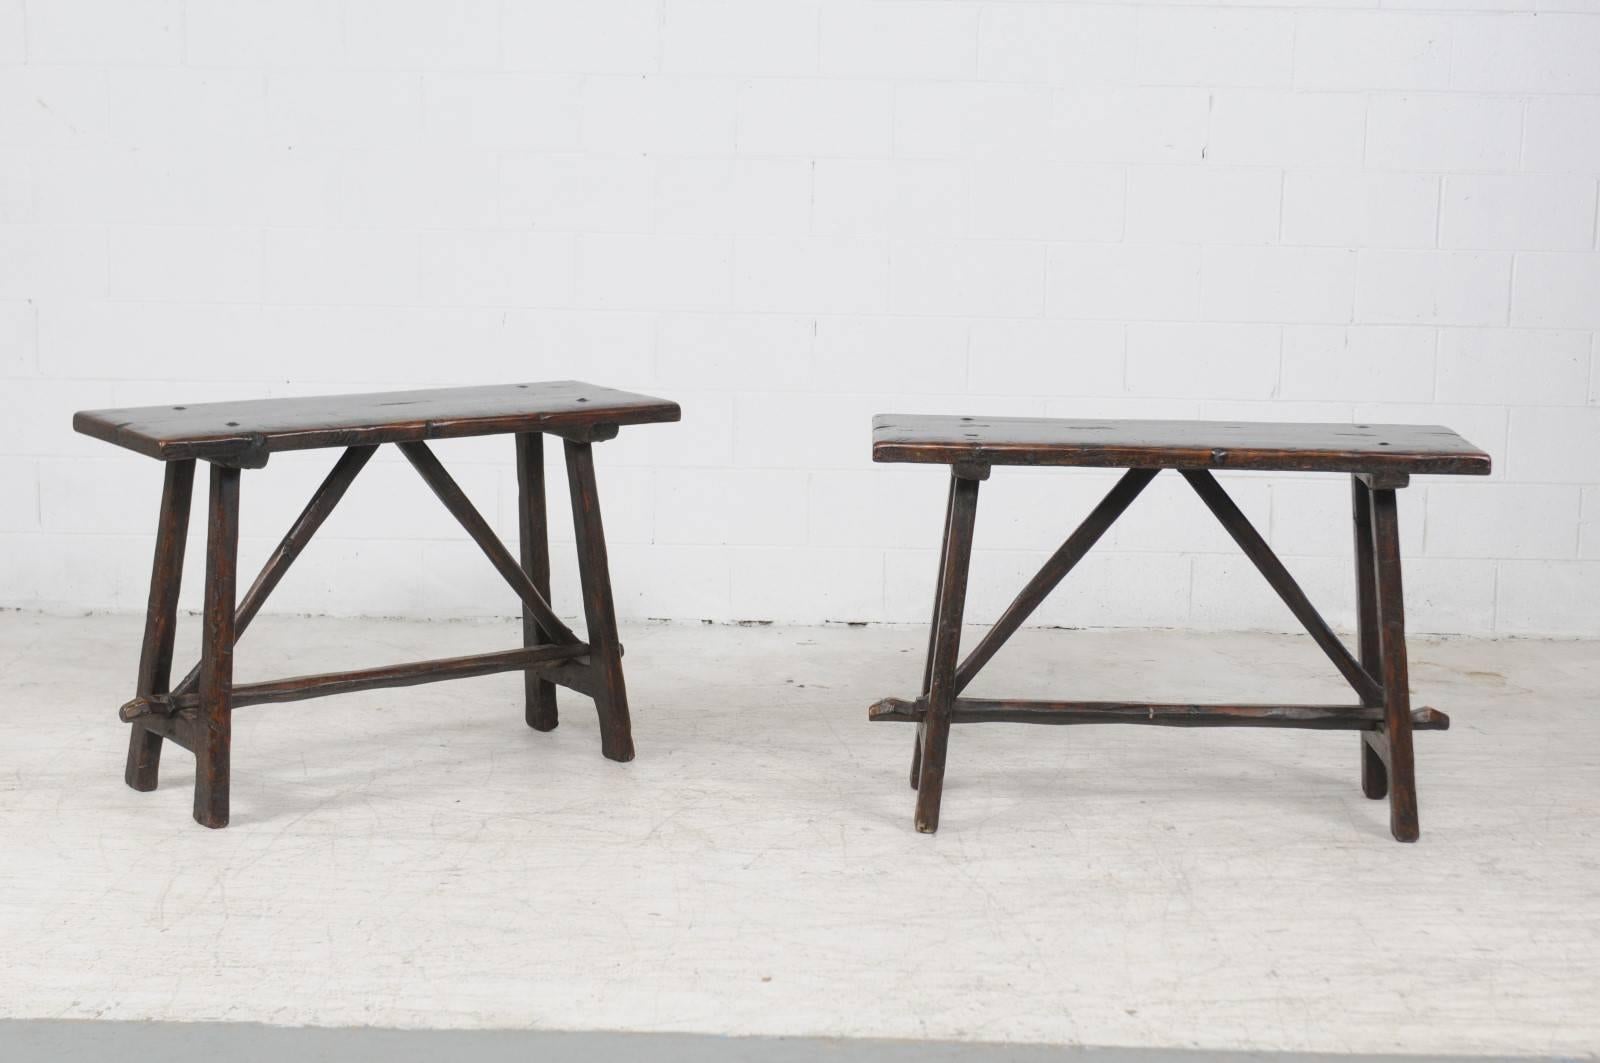 A pair of Italian walnut console tables from the early 19th century. Born during the early years of the 19th century, each of this pair of Italian console tables features a rectangular top sitting above a trestle base with splayed legs, connected to